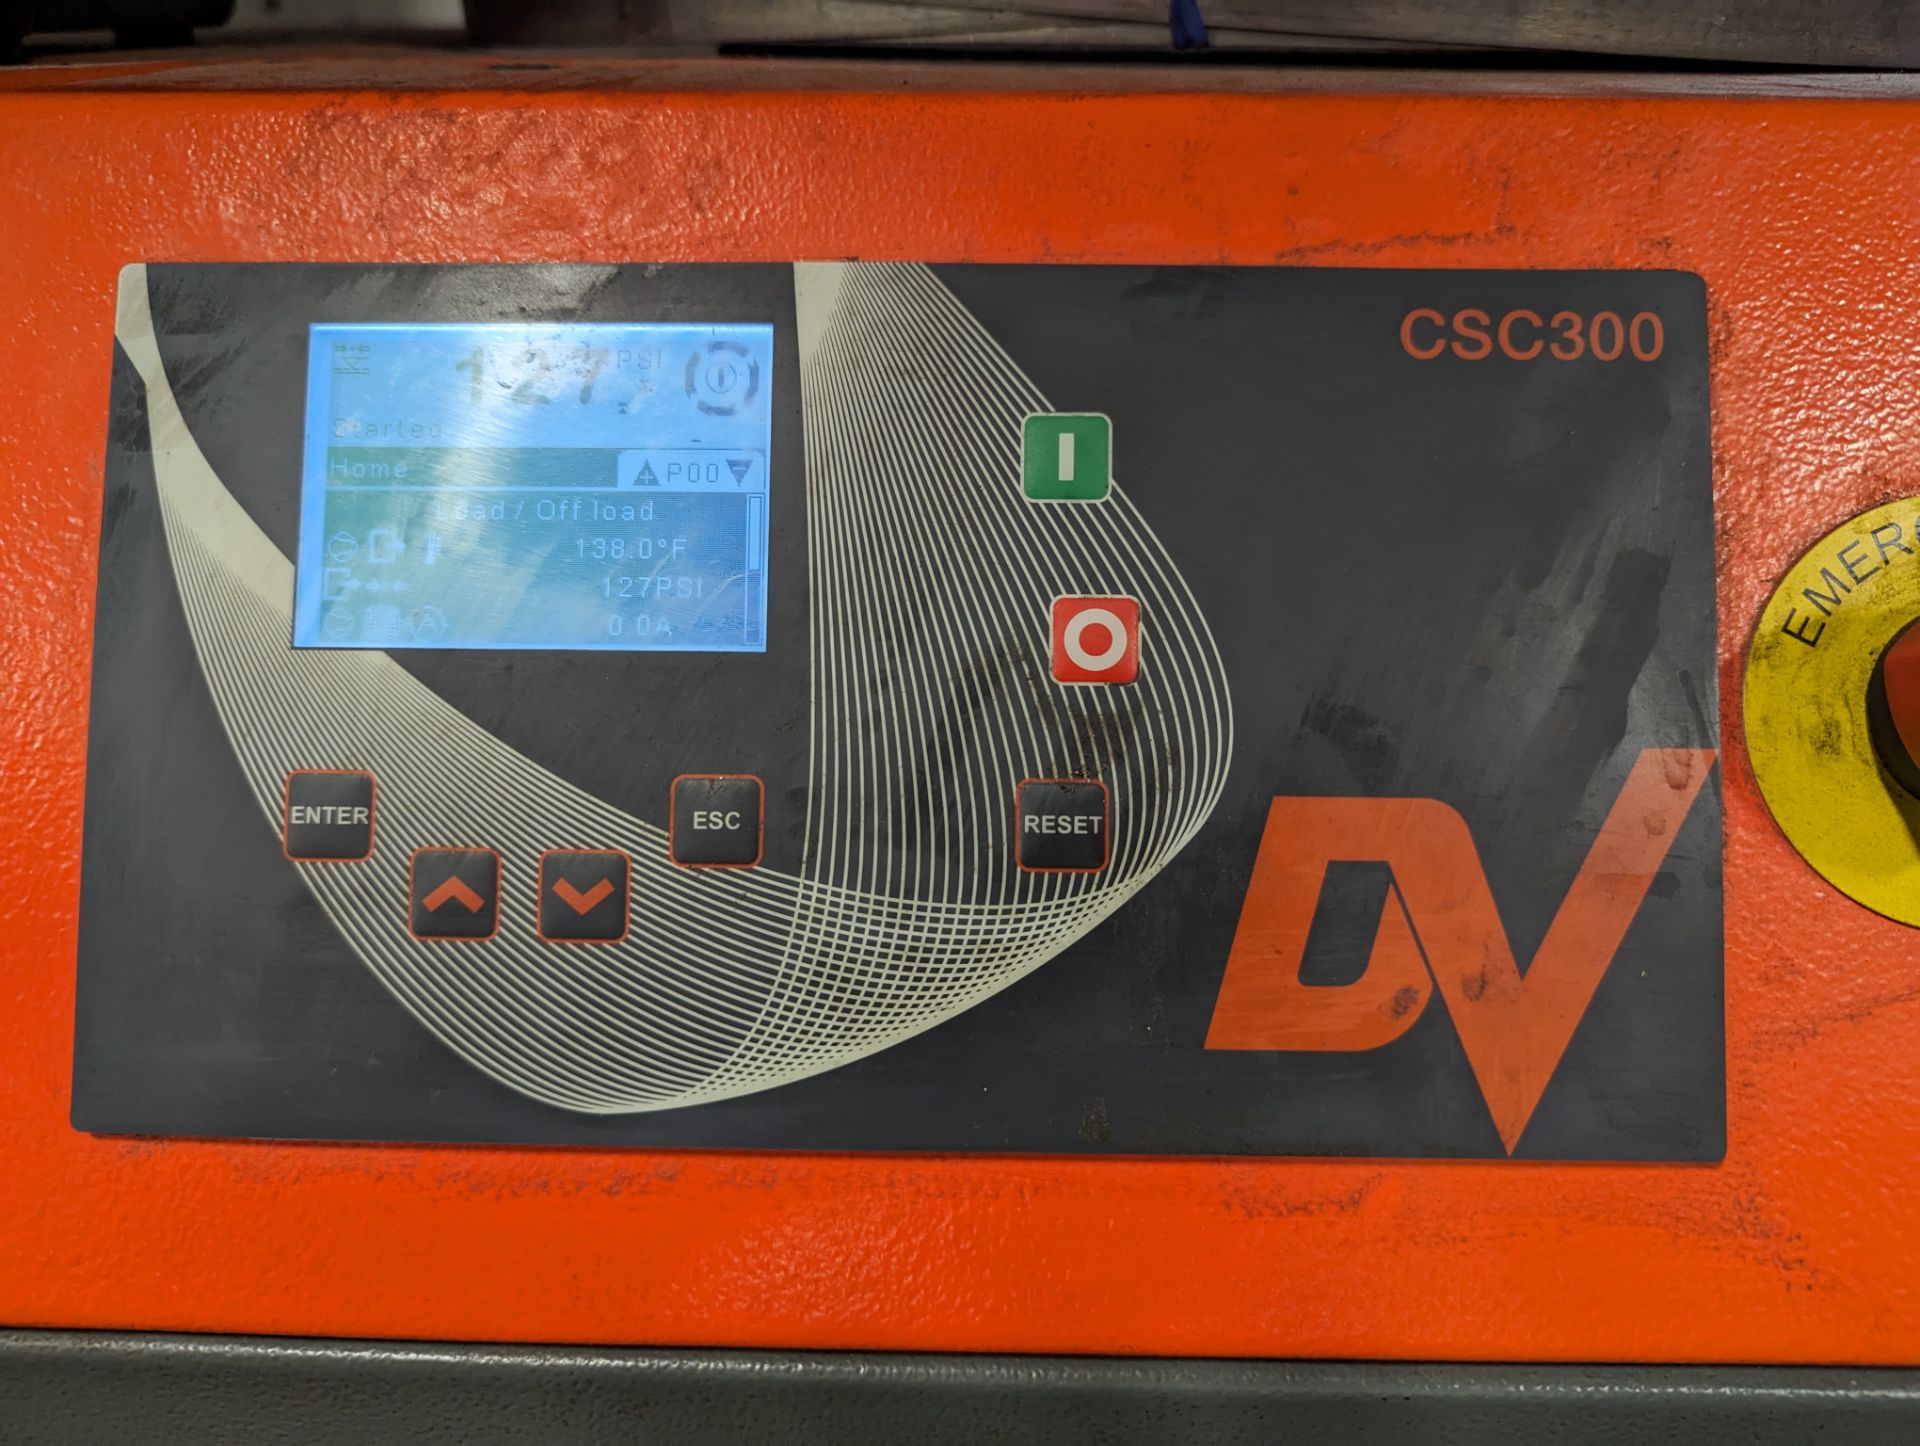 DV SYSTEMS C15TD AIR COMPRESSOR, 15HP, PRODUCT NUMBER S-002433, S/N 082733 W/ ASD60 AIR DRYER - Image 2 of 4